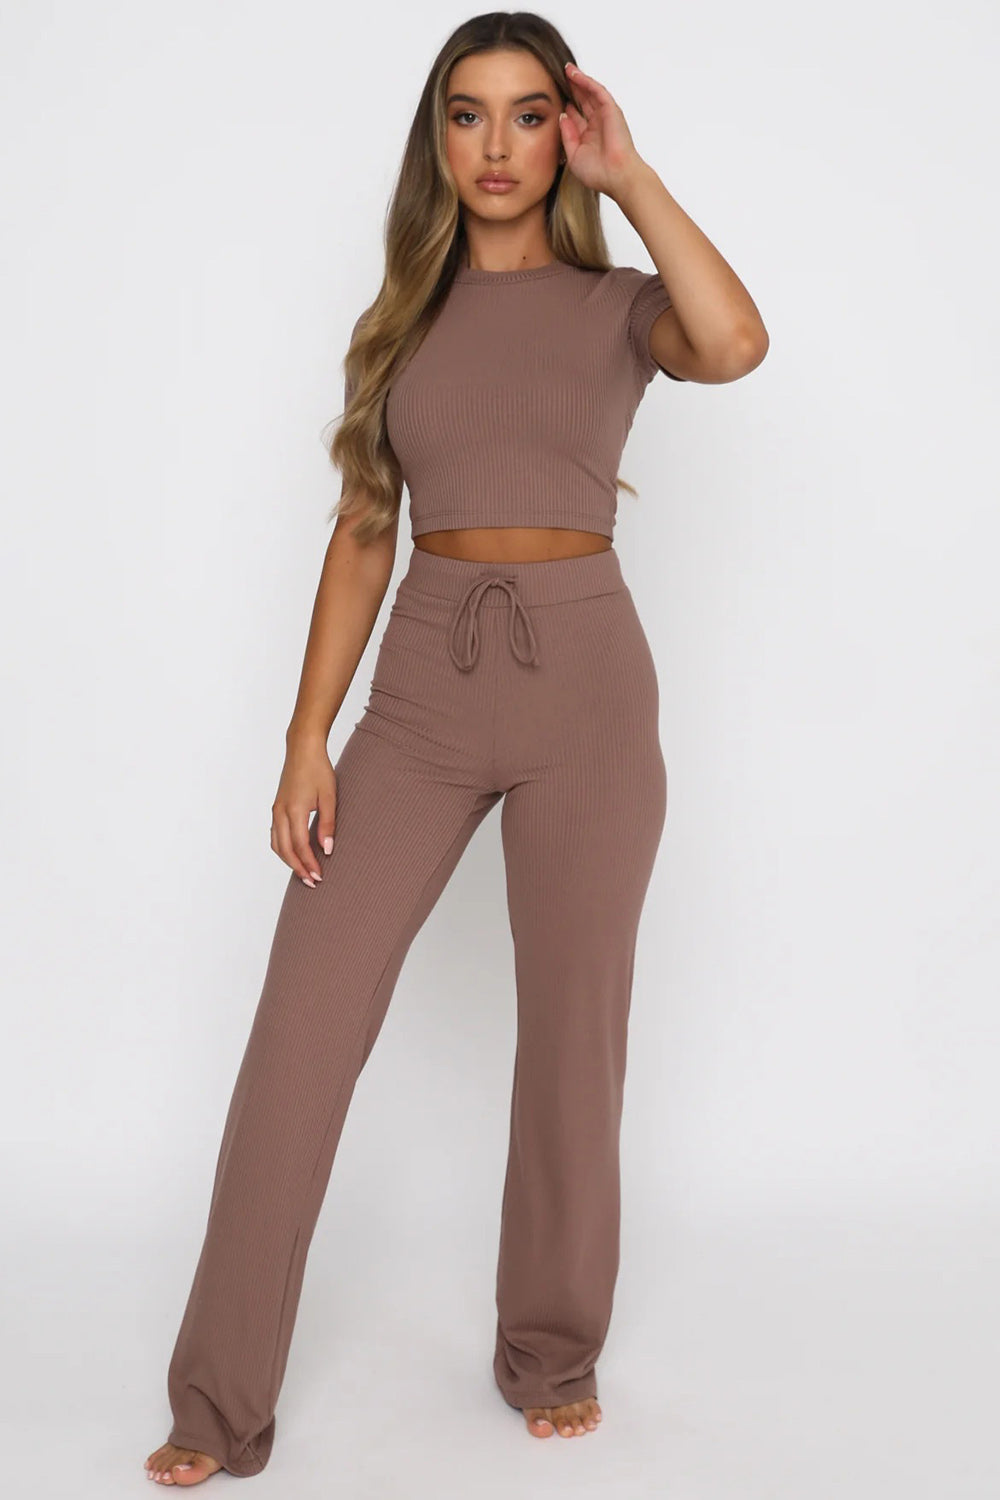 Short Sleeve Top and Pants Set